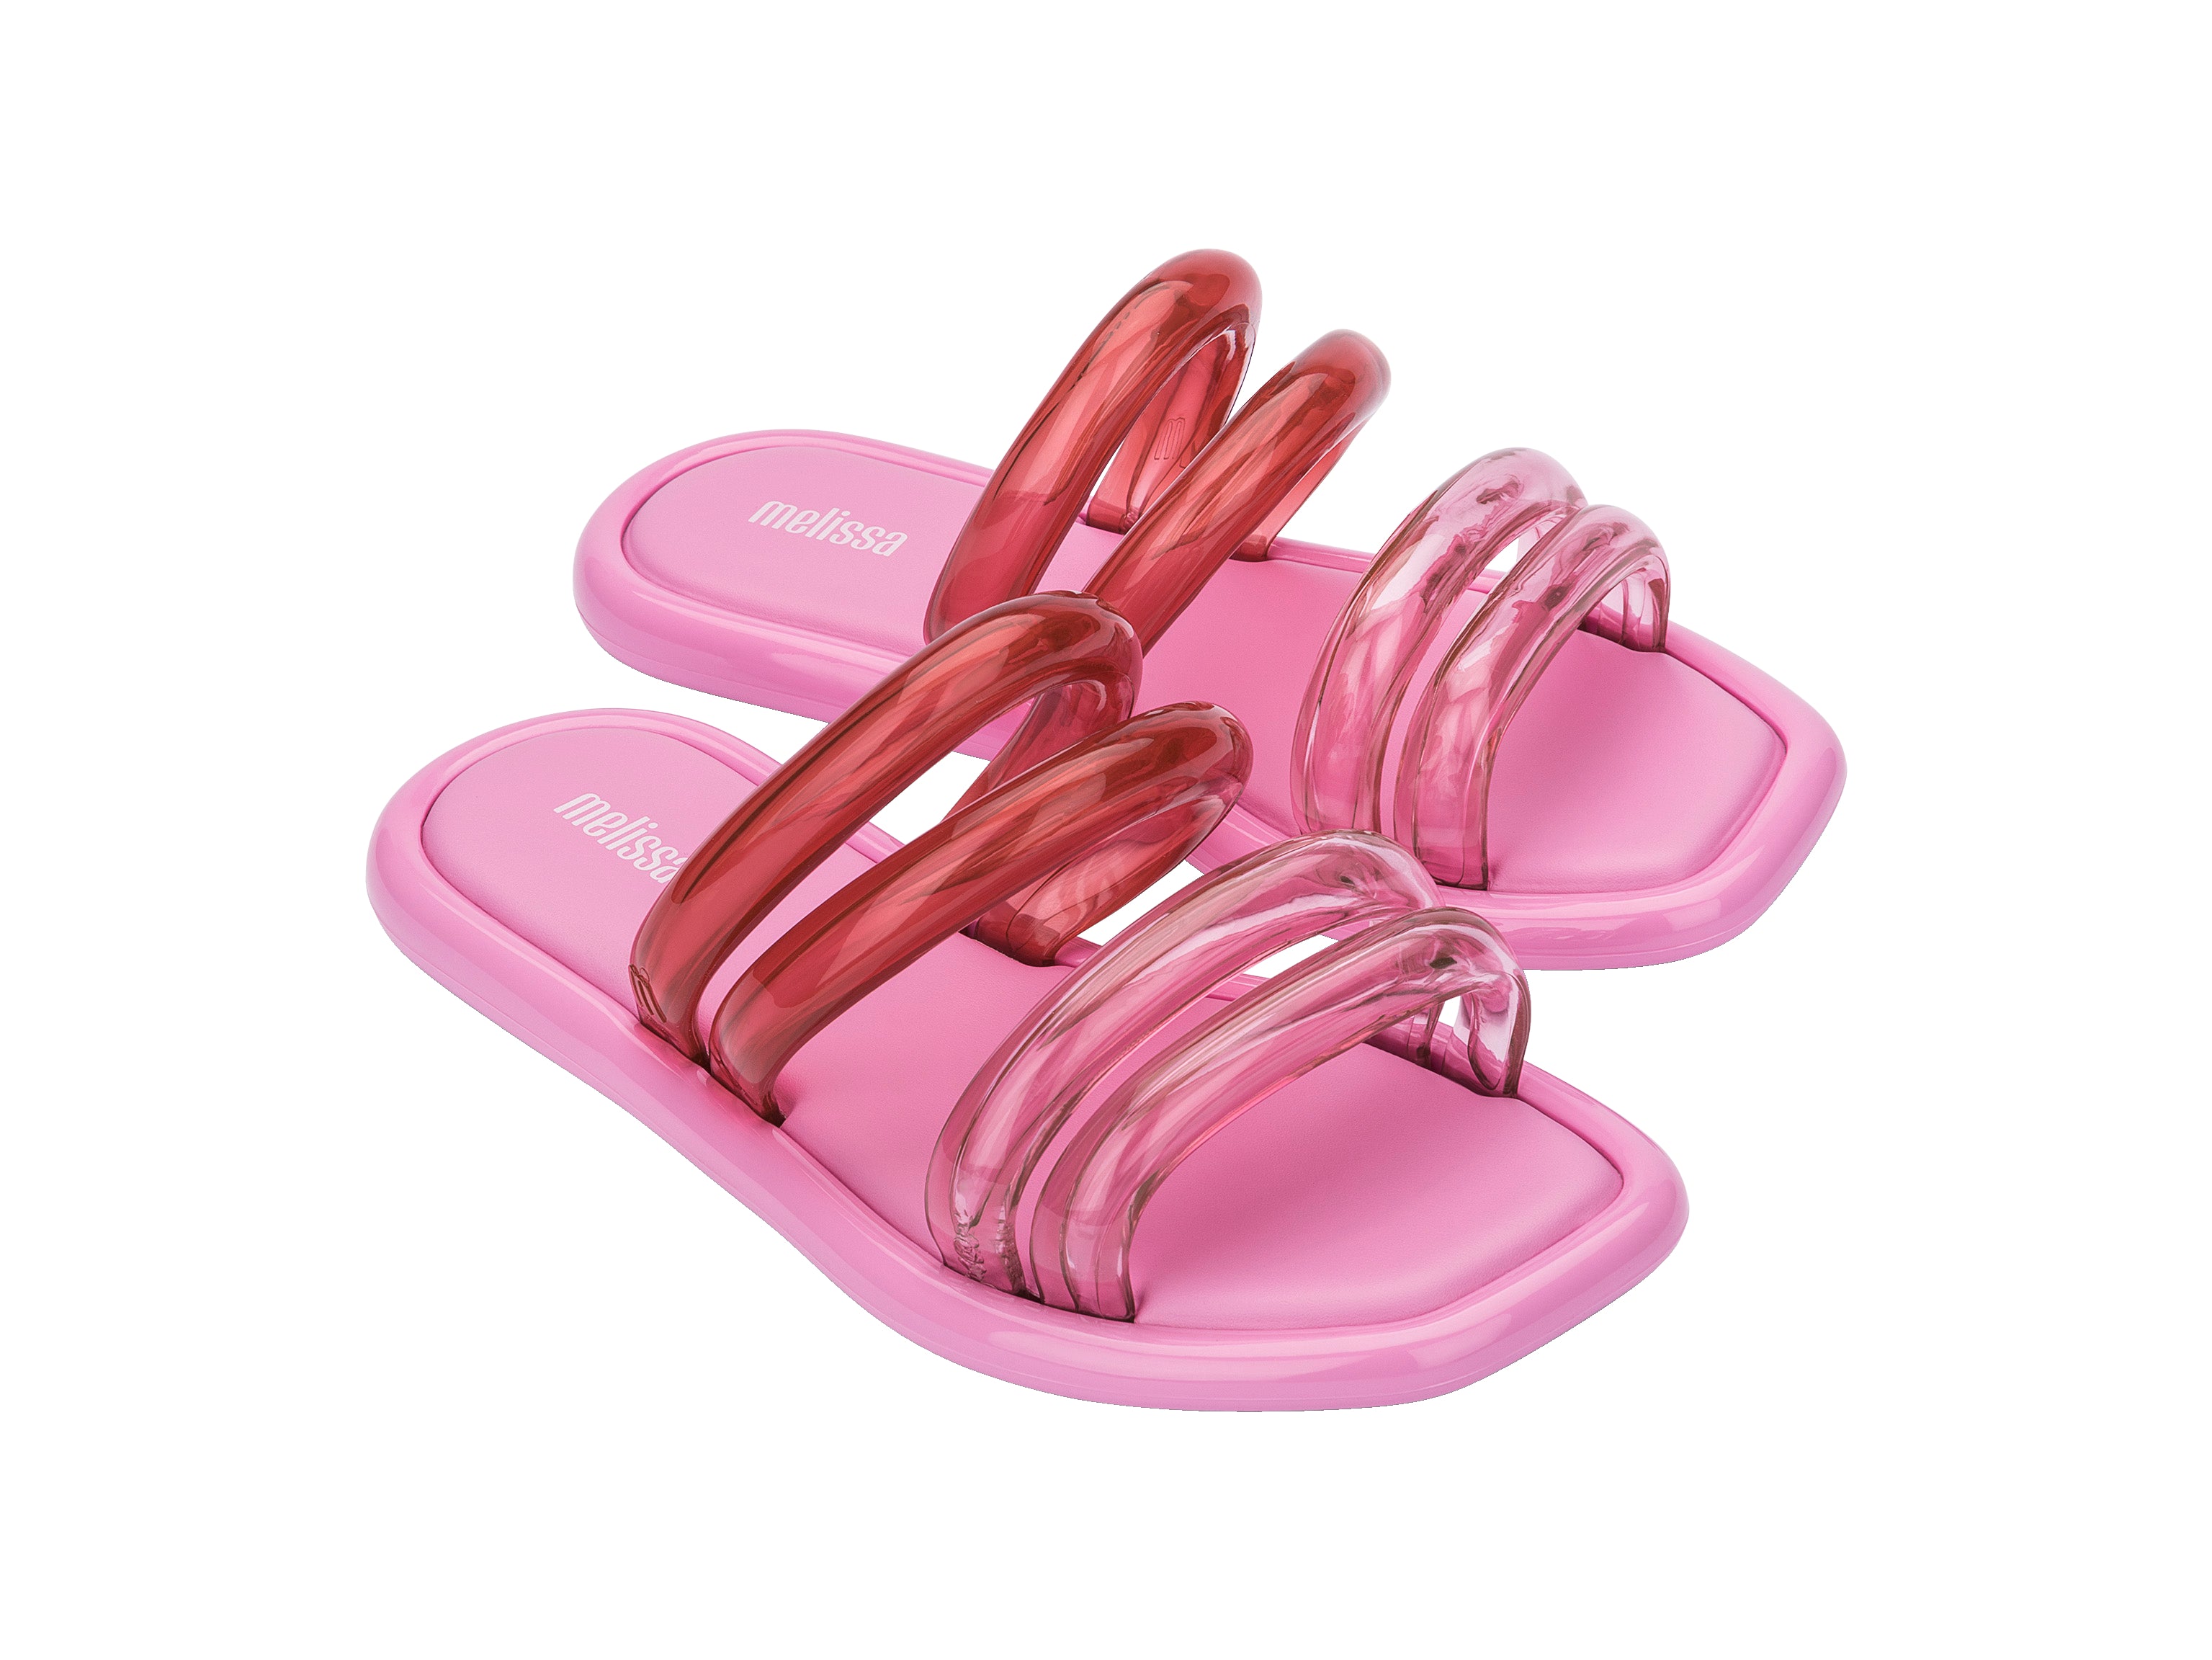 Melissa Airbubble Slide - Pink